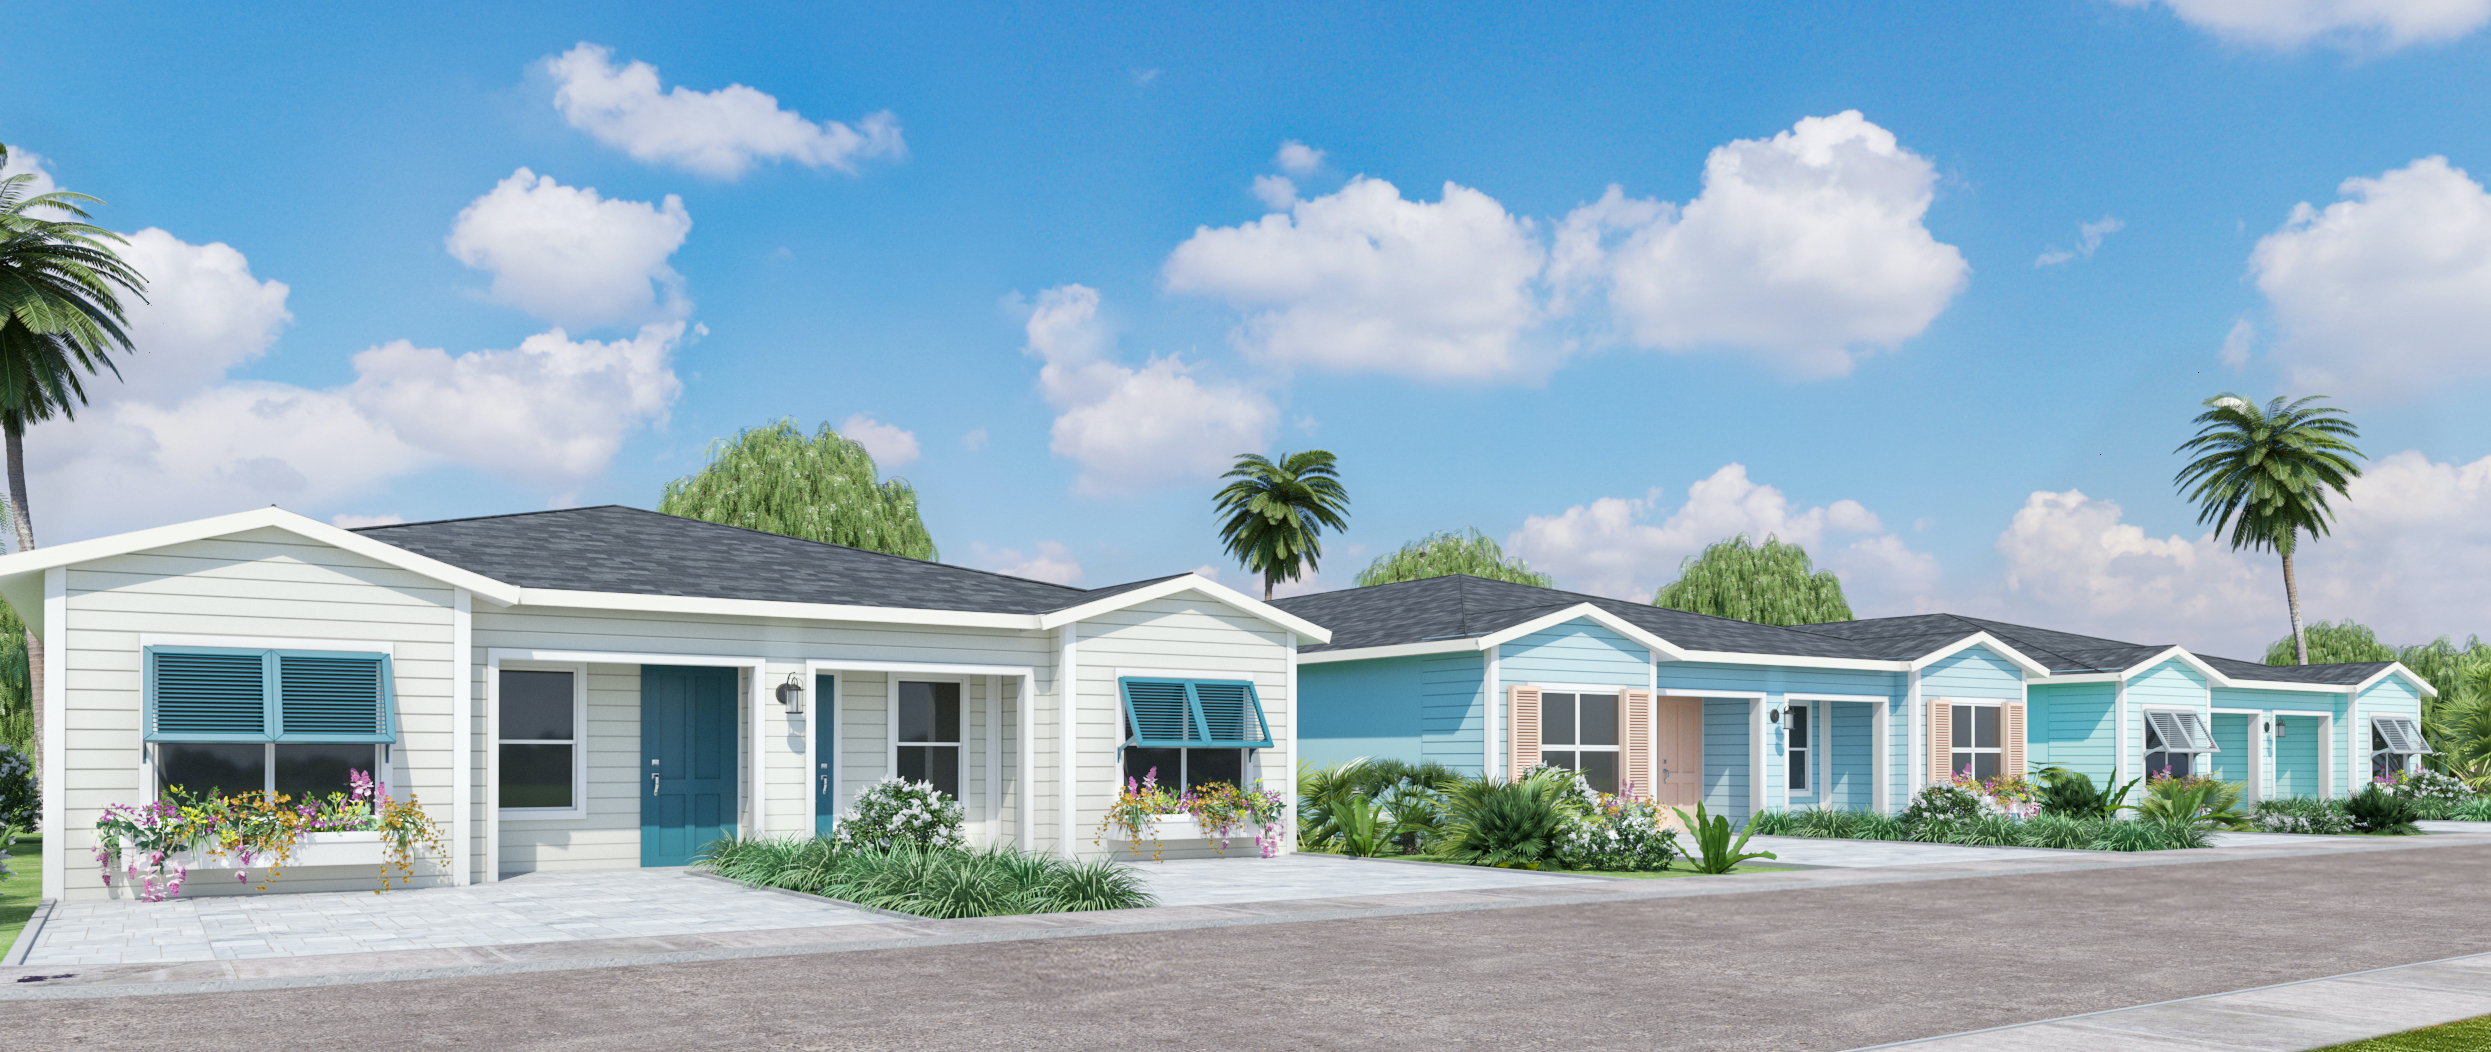 Exterior Elevation of The Keys Homes Florida, upscale rental communities at an affordable price